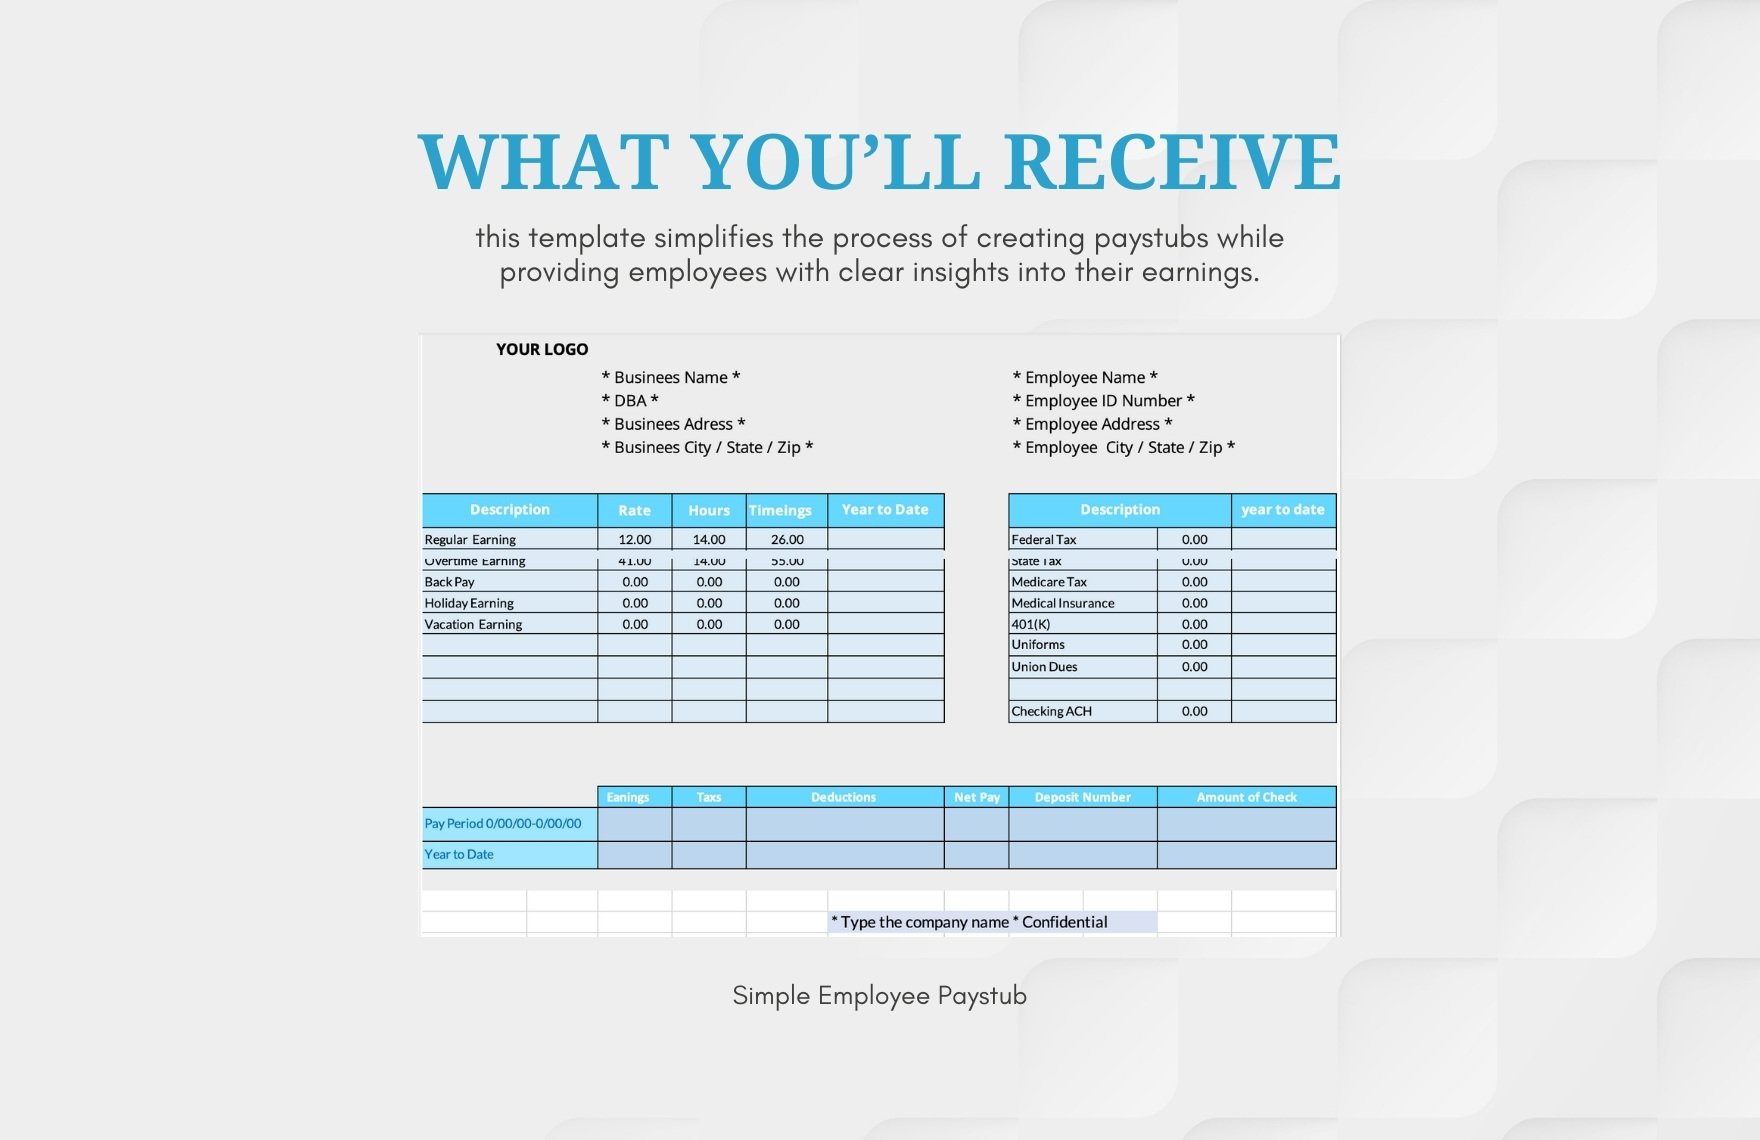 Simple Employee Paystub Template